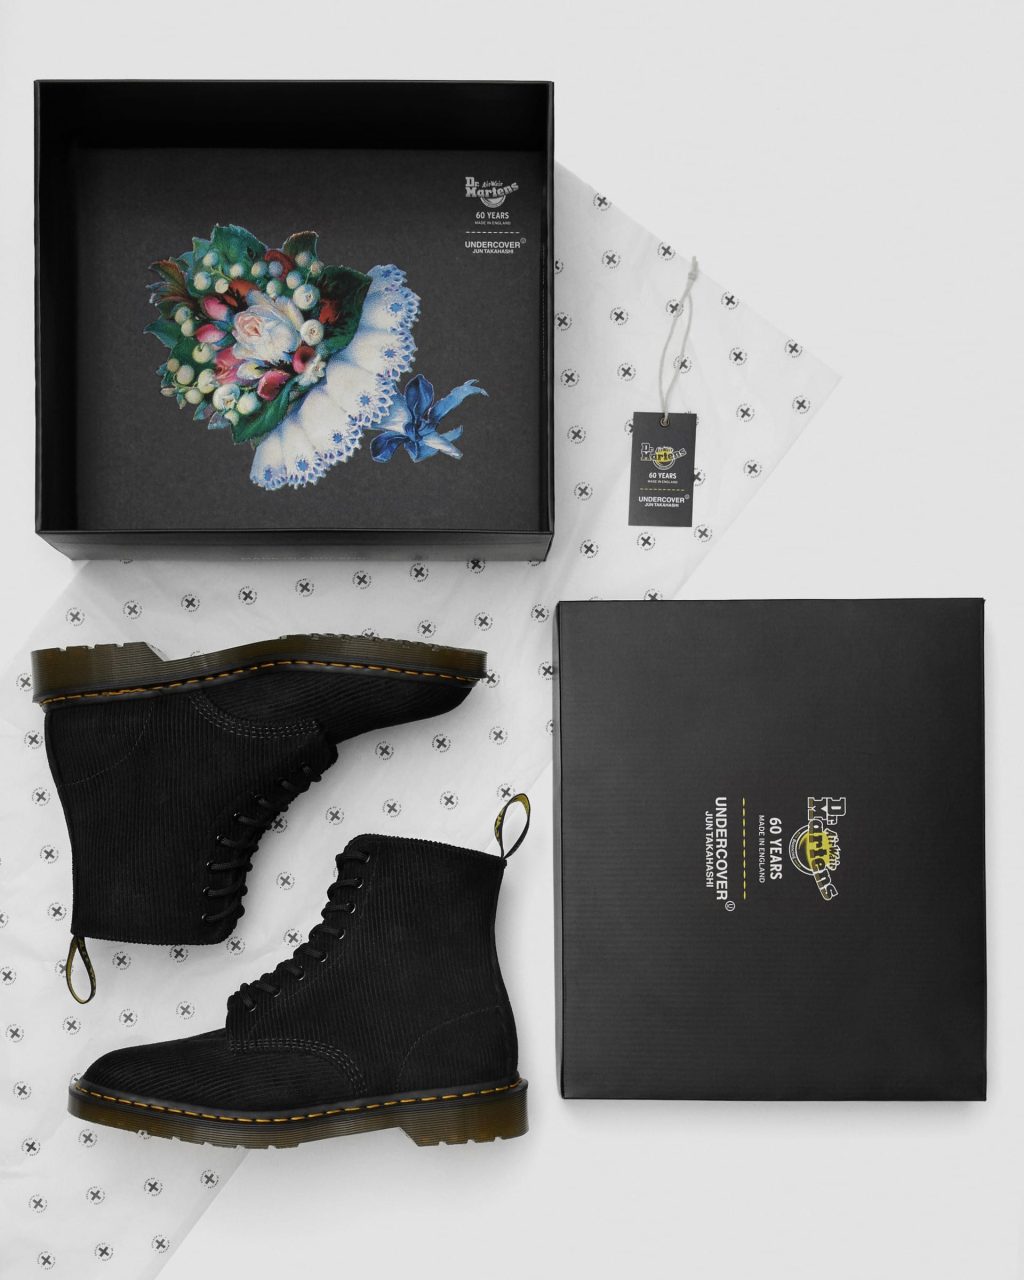 UNDERCOVER × DR.MARTENS 8ホールコラボブーツが5/23に国内発売予定 